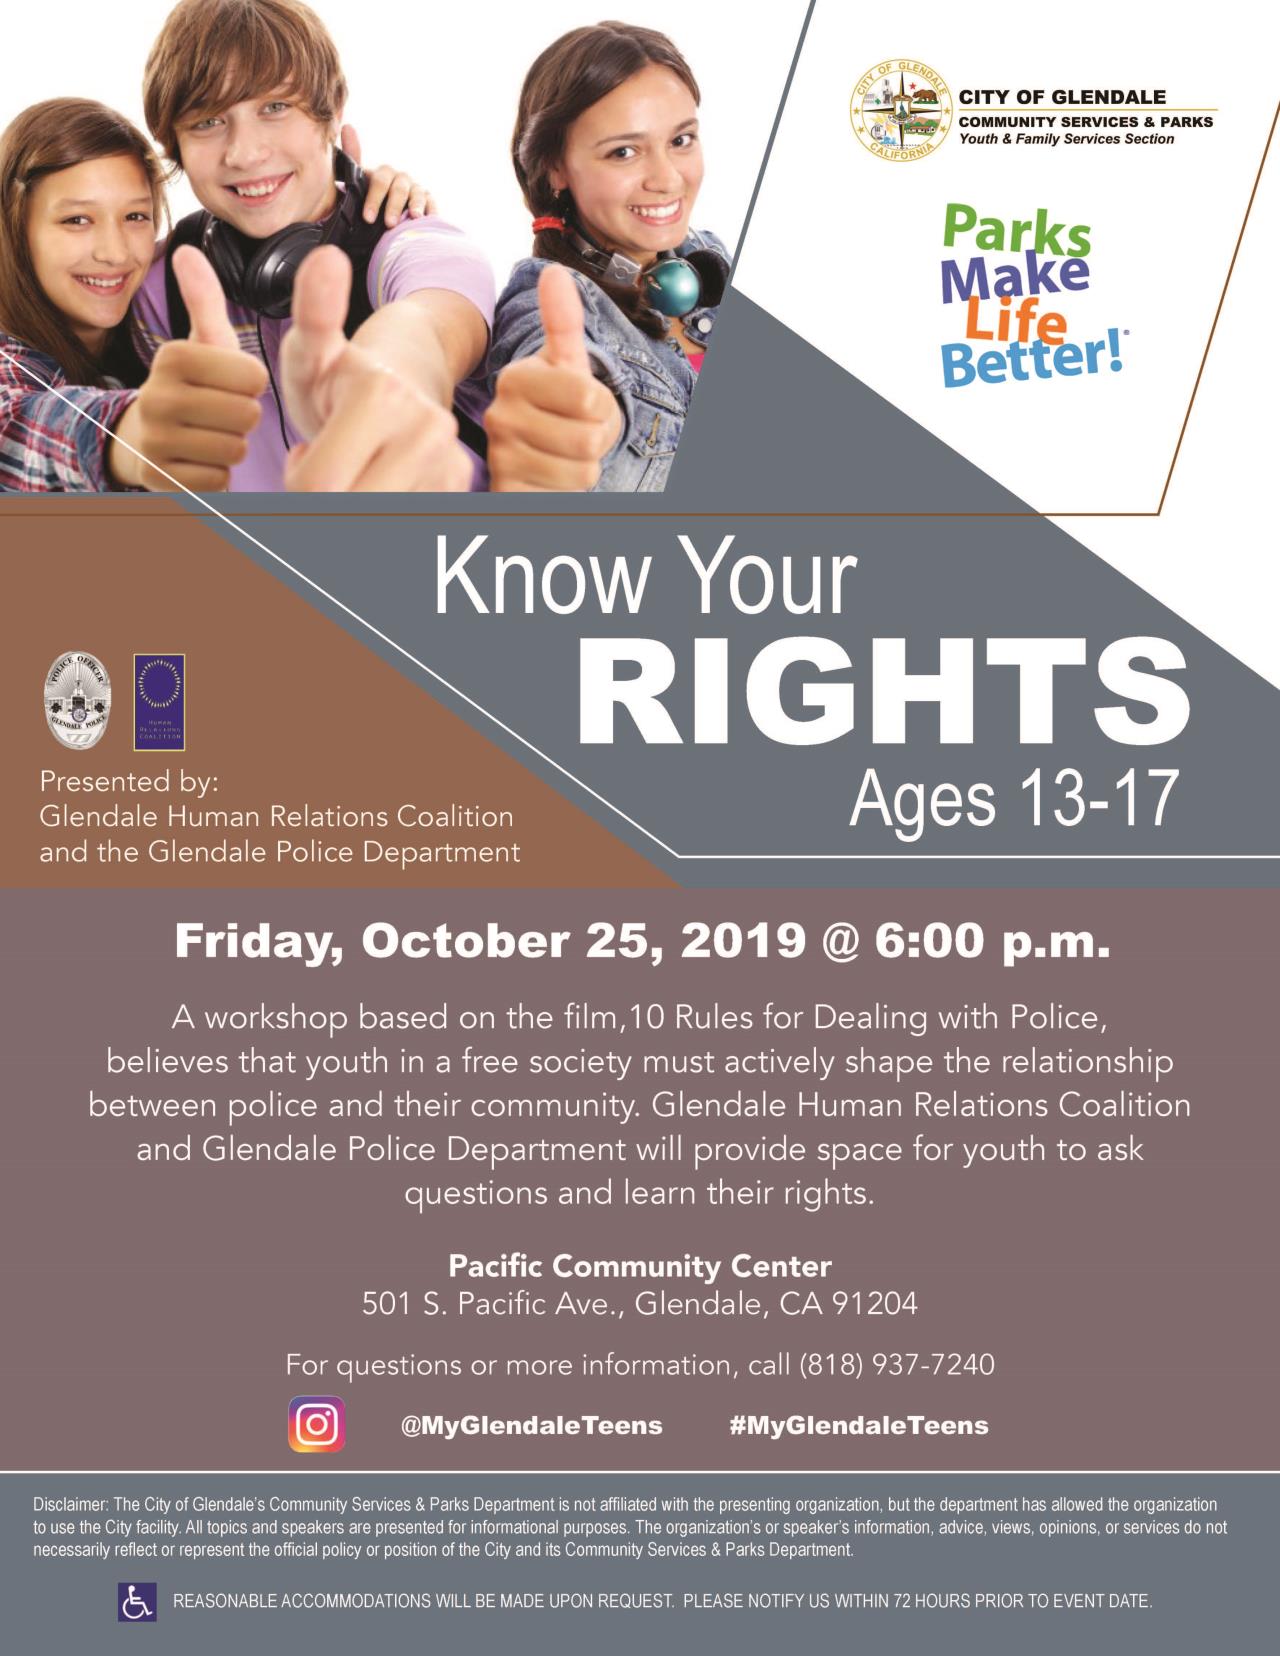 Know Your Rights Flyer 2019 FINAL1